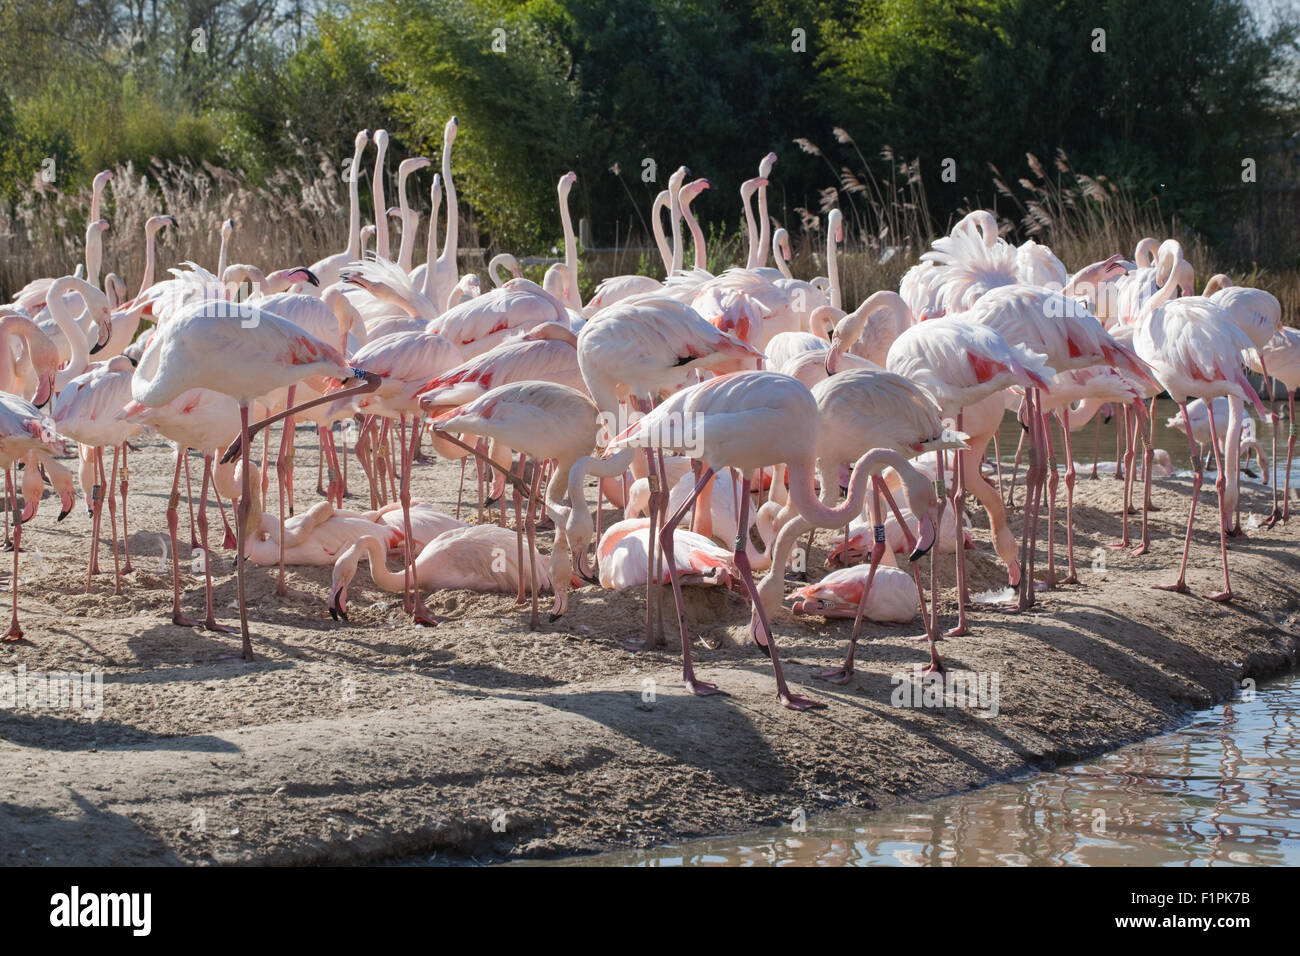 Greater Flamingos (Phoenicopterus roseus),  section of a flock of 260 birds - on view for human visitors. WWT Slimbridge, UK. Stock Photo